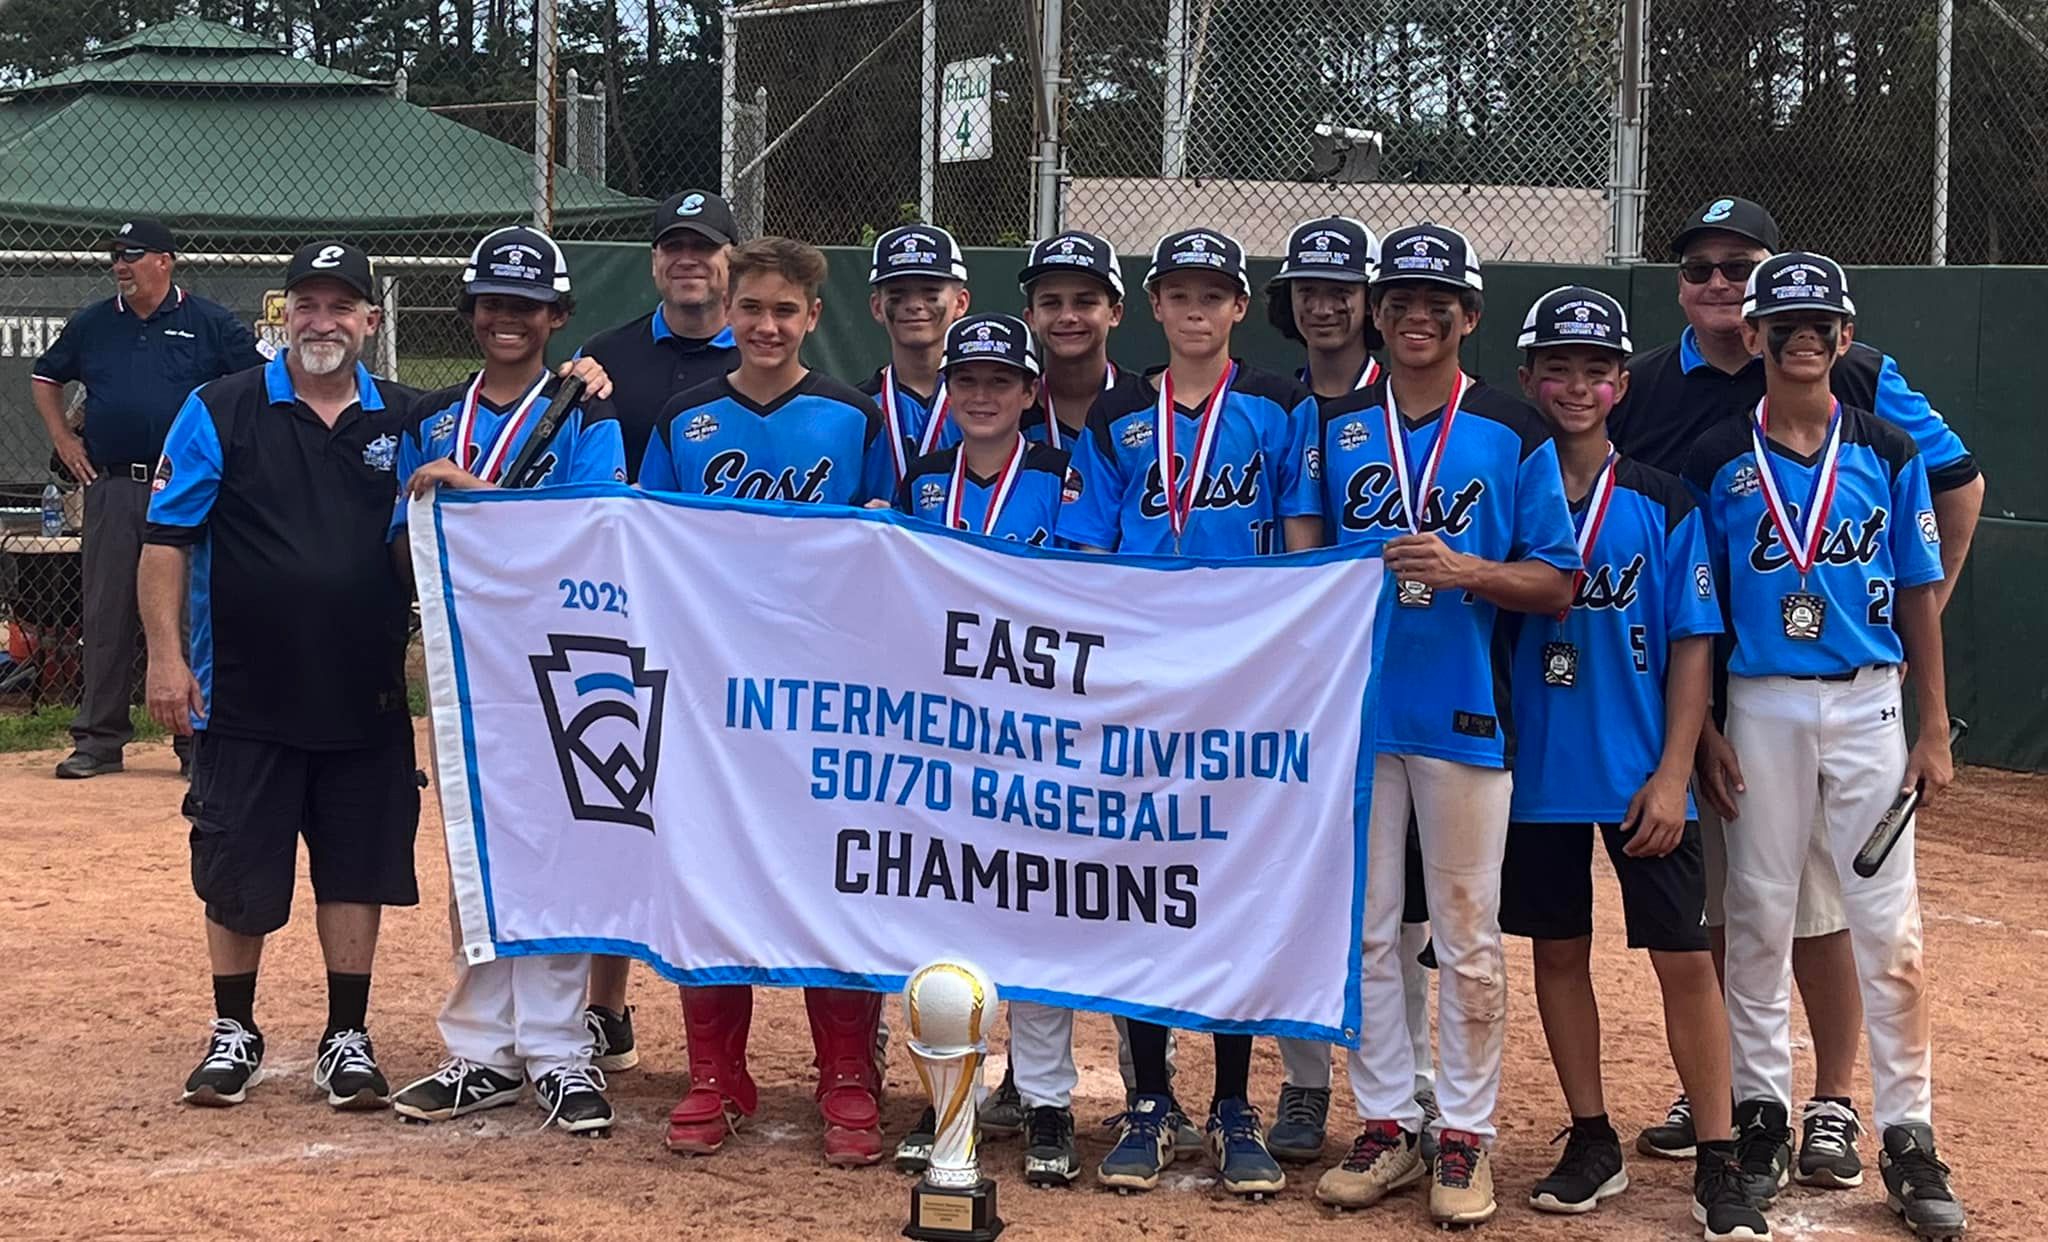 Toms River East Little League will be Representing the East Region in